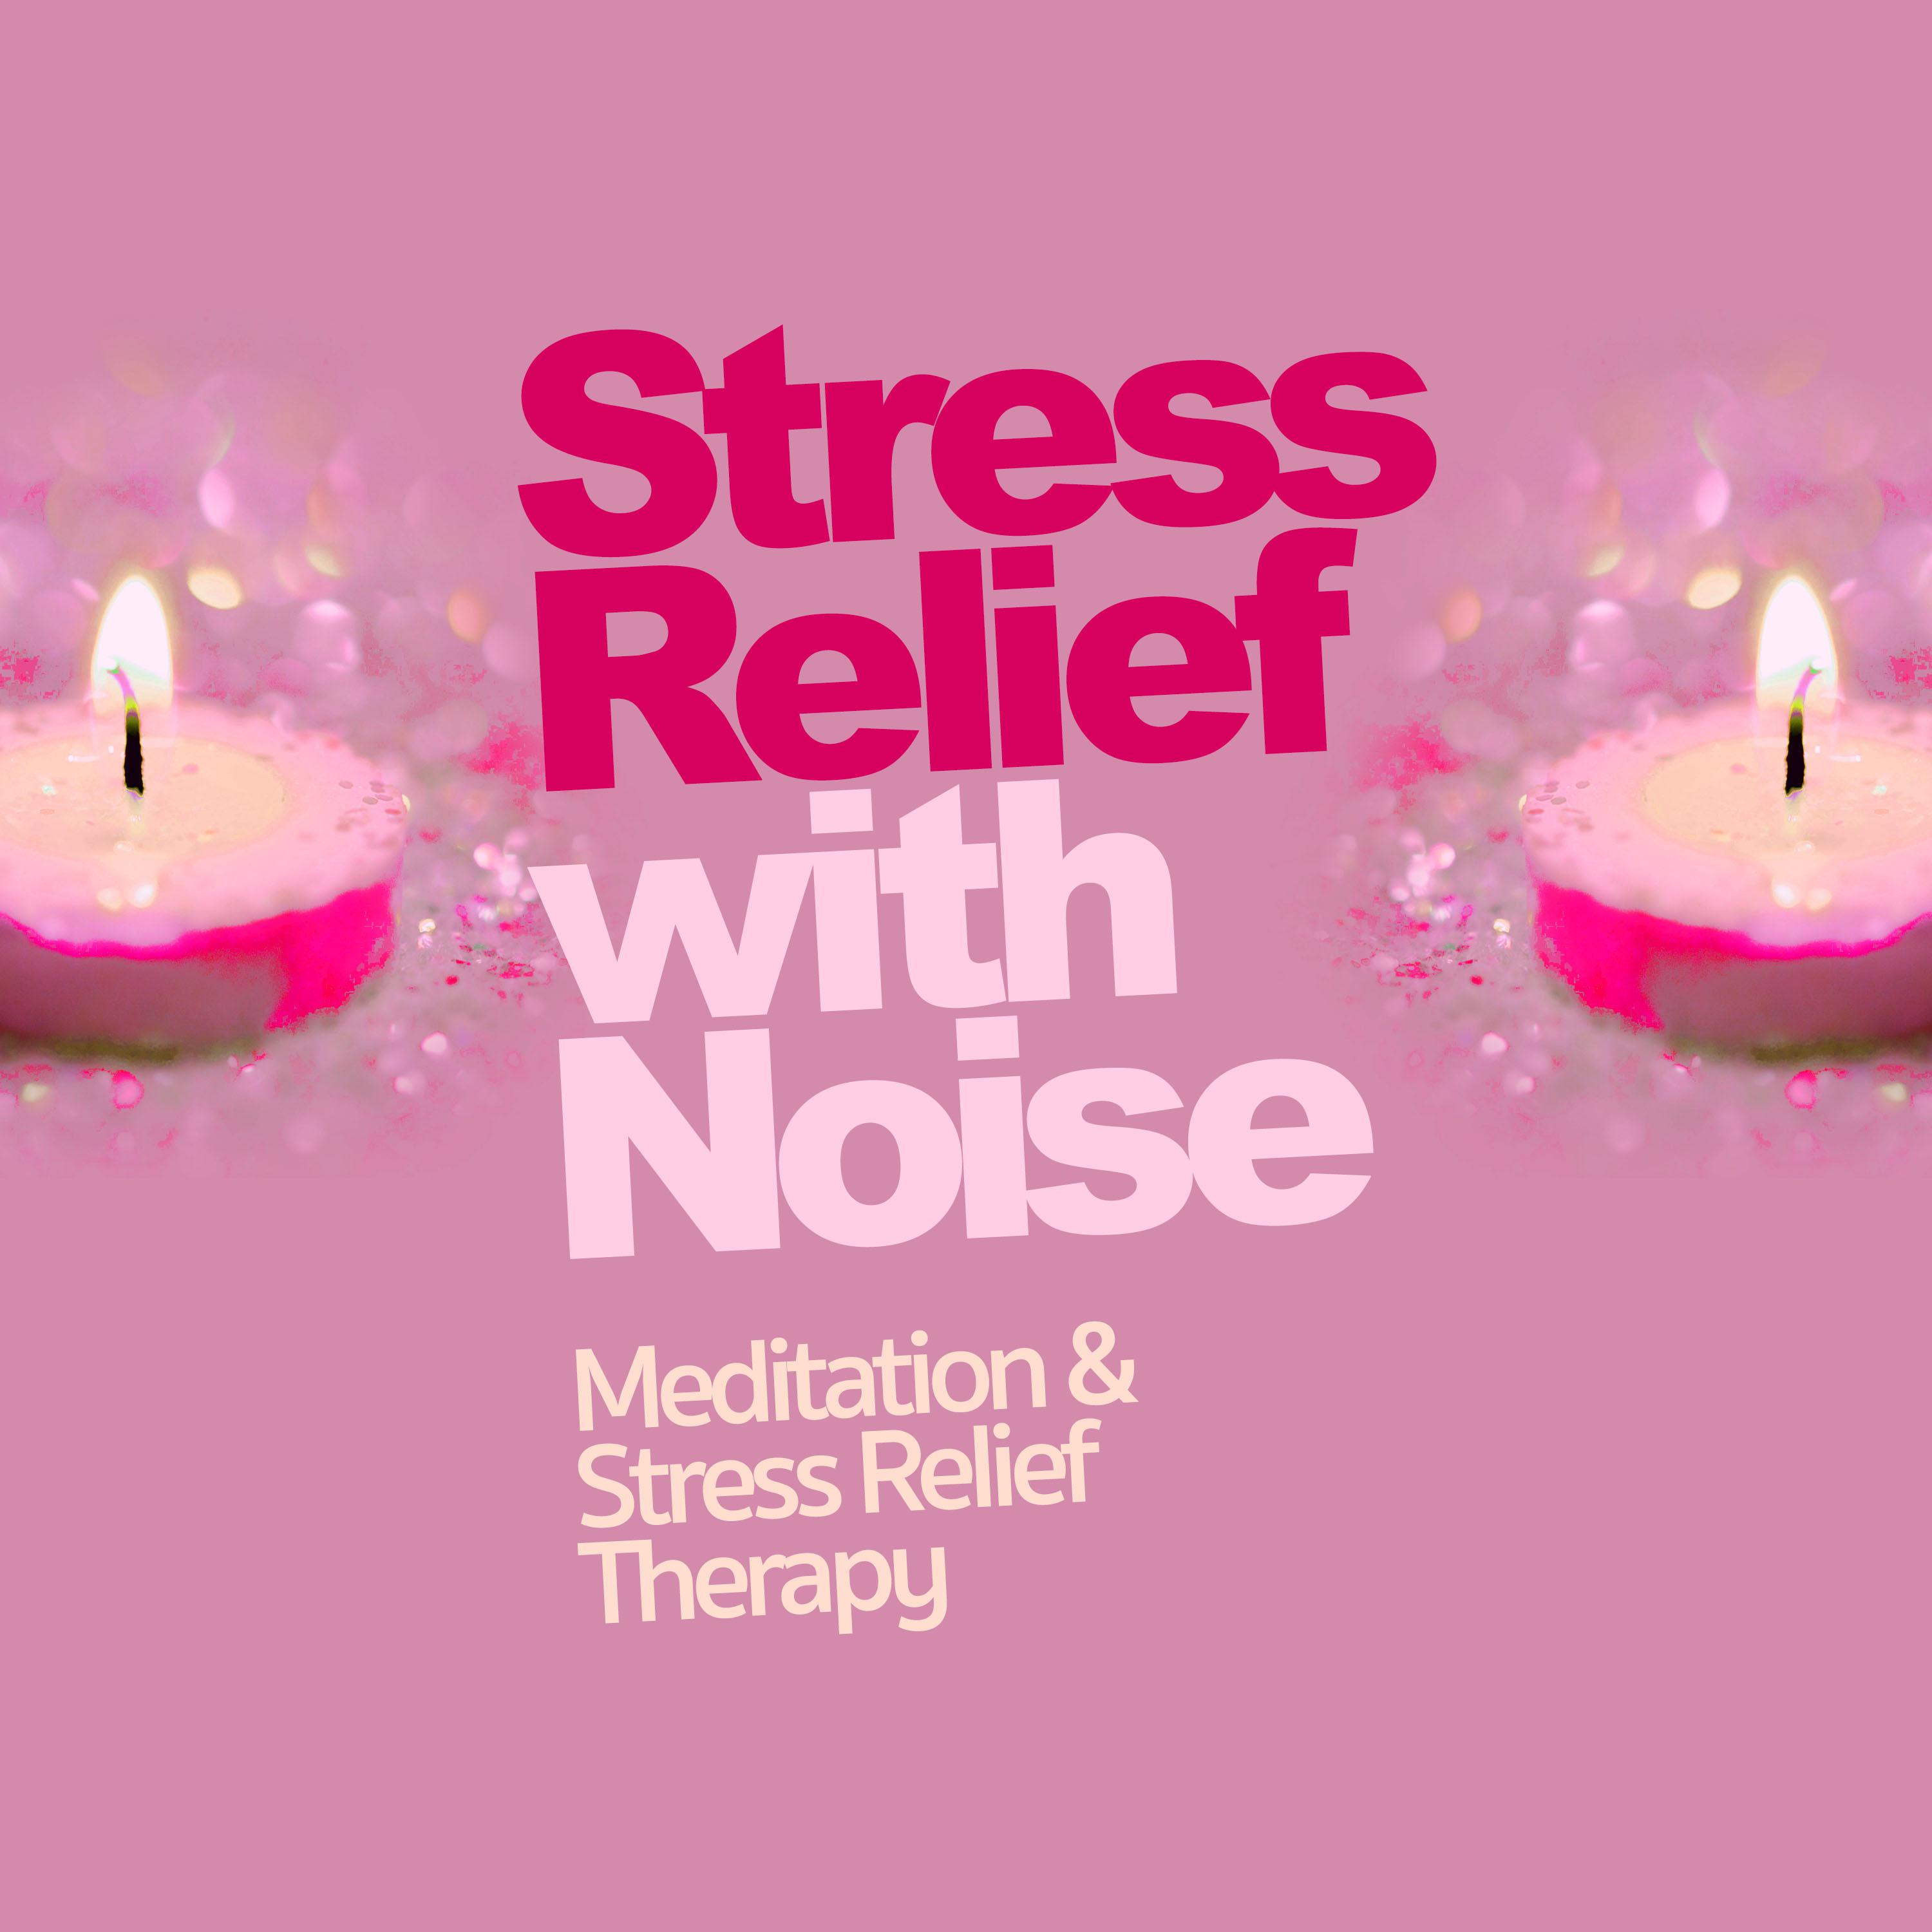 Stress Relief with Noise